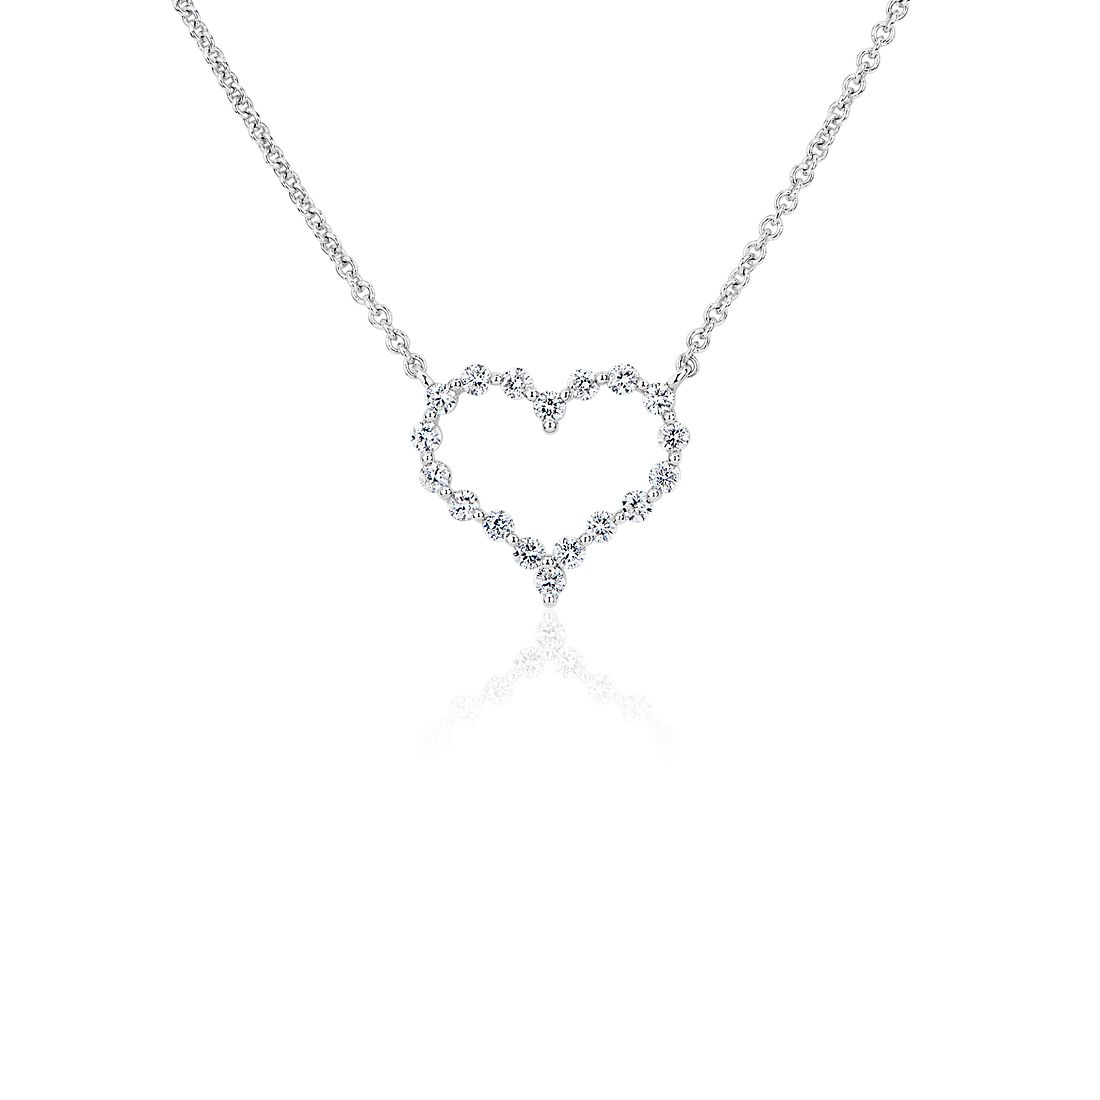 Floating Diamond Heart Necklace in 14k White Gold (0.23 ct. tw.)